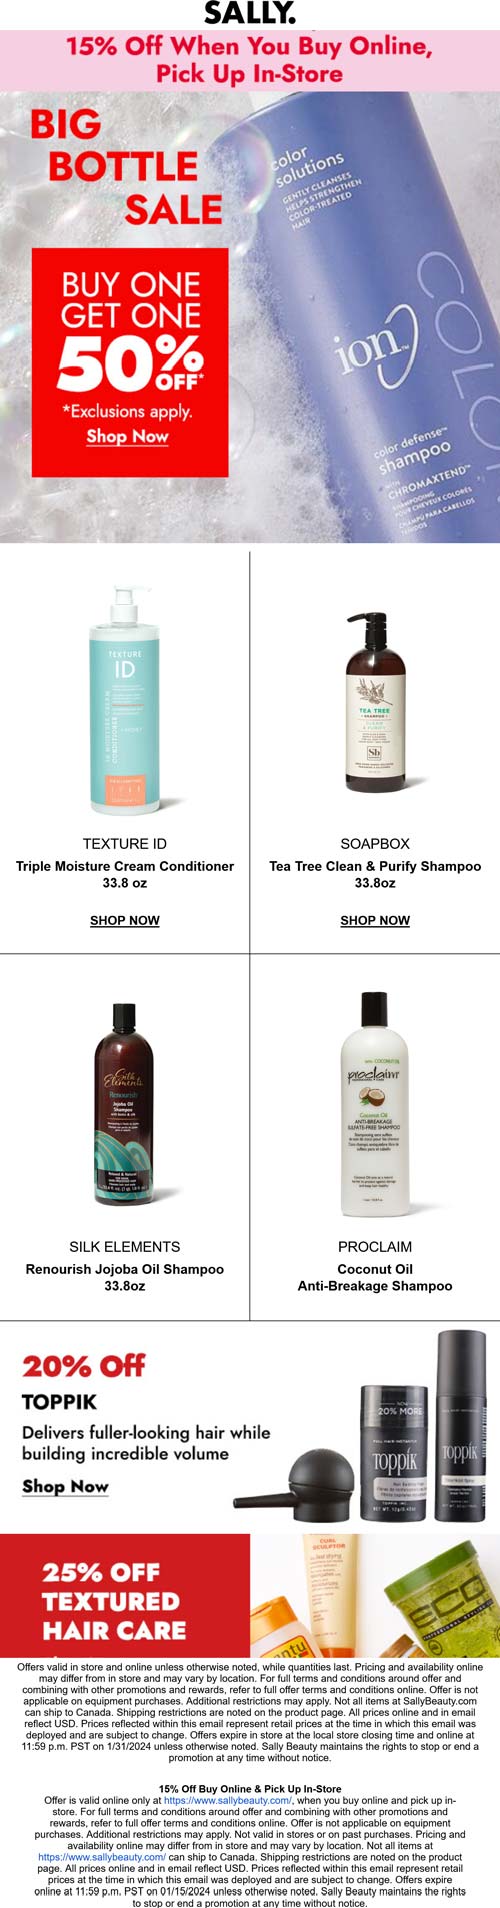 Second big bottle 50% off & more at Sally beauty #sally